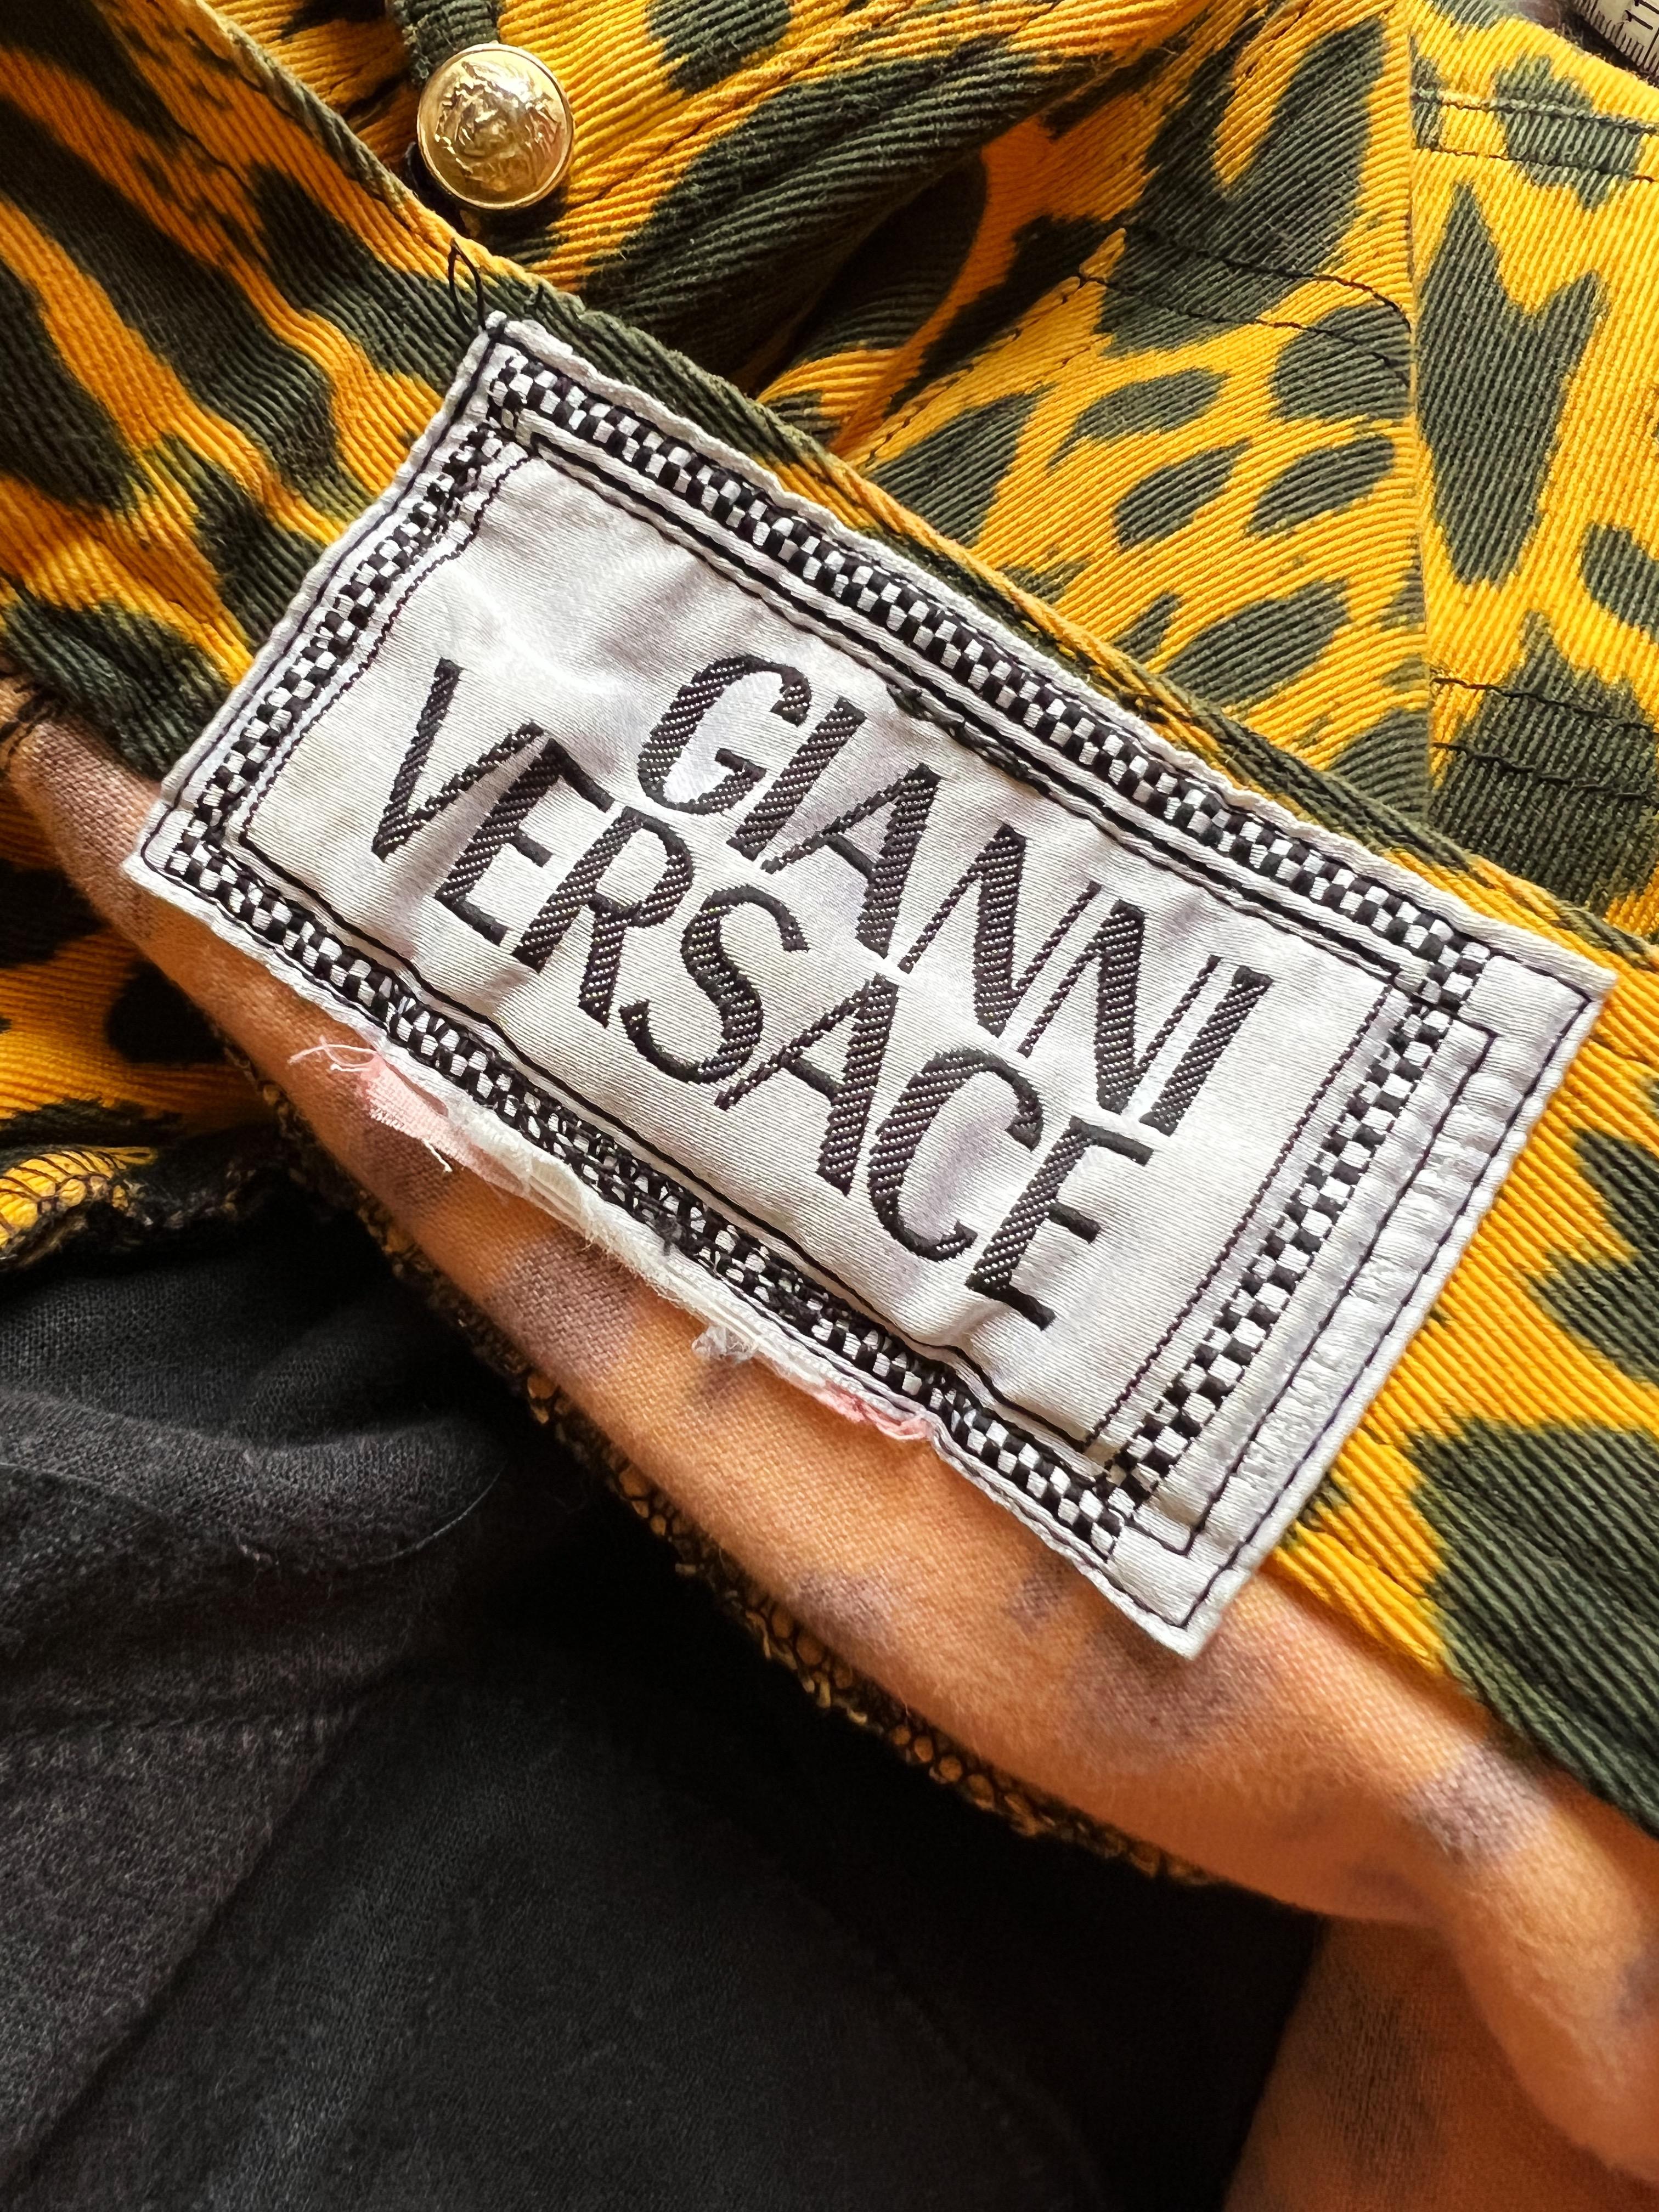 Spring 1992 Gianni Versace Runway Cheetah Leopard High waisted patterned Jeans In Excellent Condition For Sale In Sheffield, GB